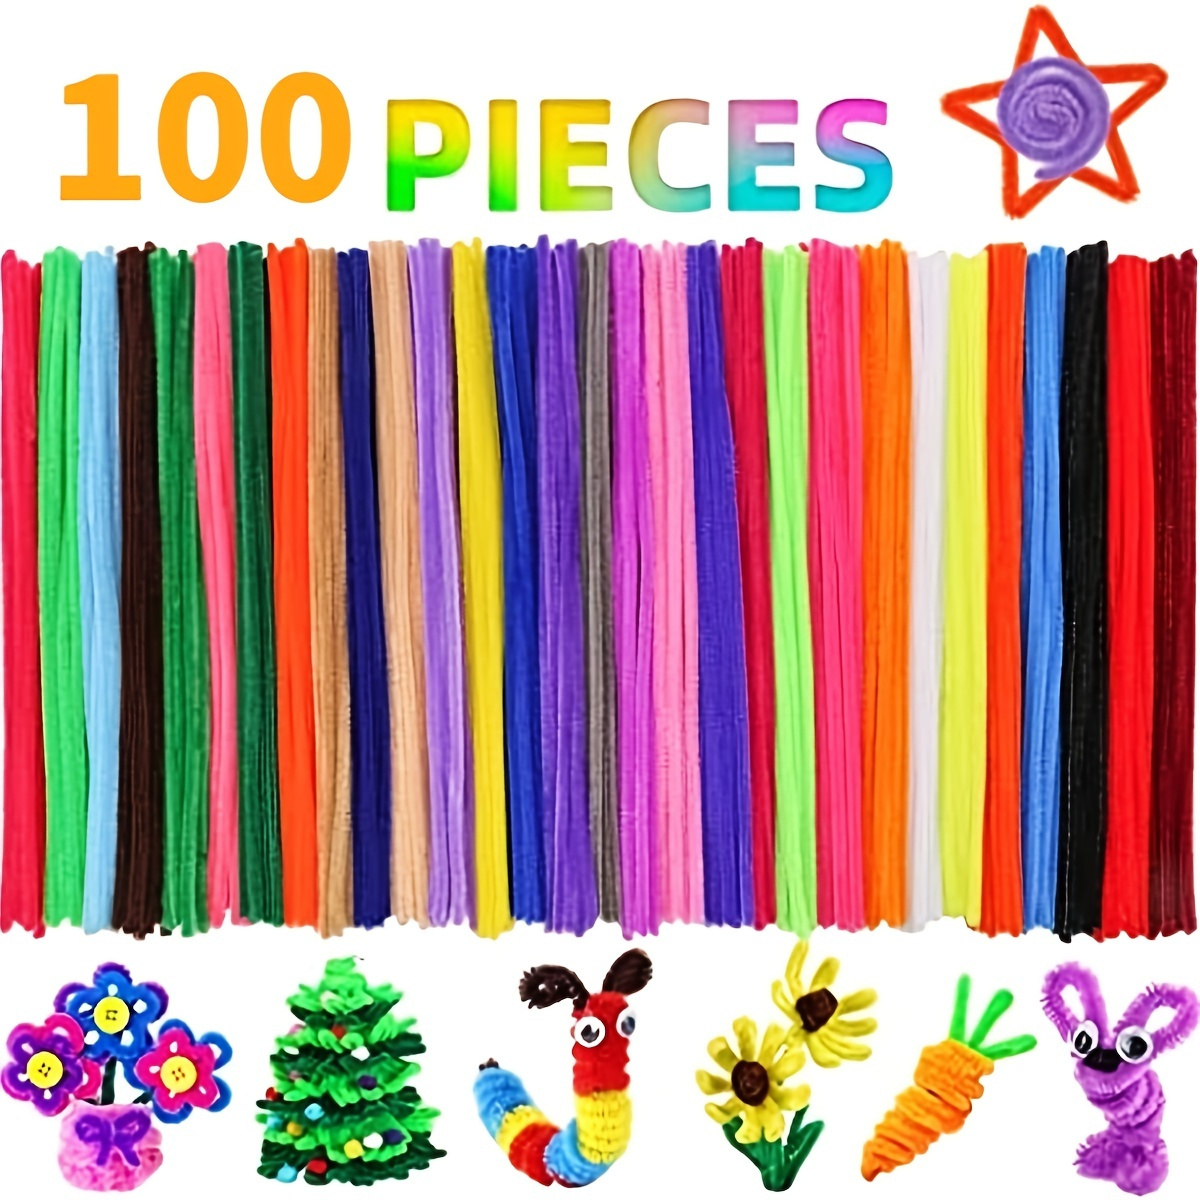 Menkey 200psc Dark Blue Pipe Cleaners, Chenille Stems, Pipe Cleaners for Crafts, Pipe Cleaner Crafts, Art and Craft Supplies.